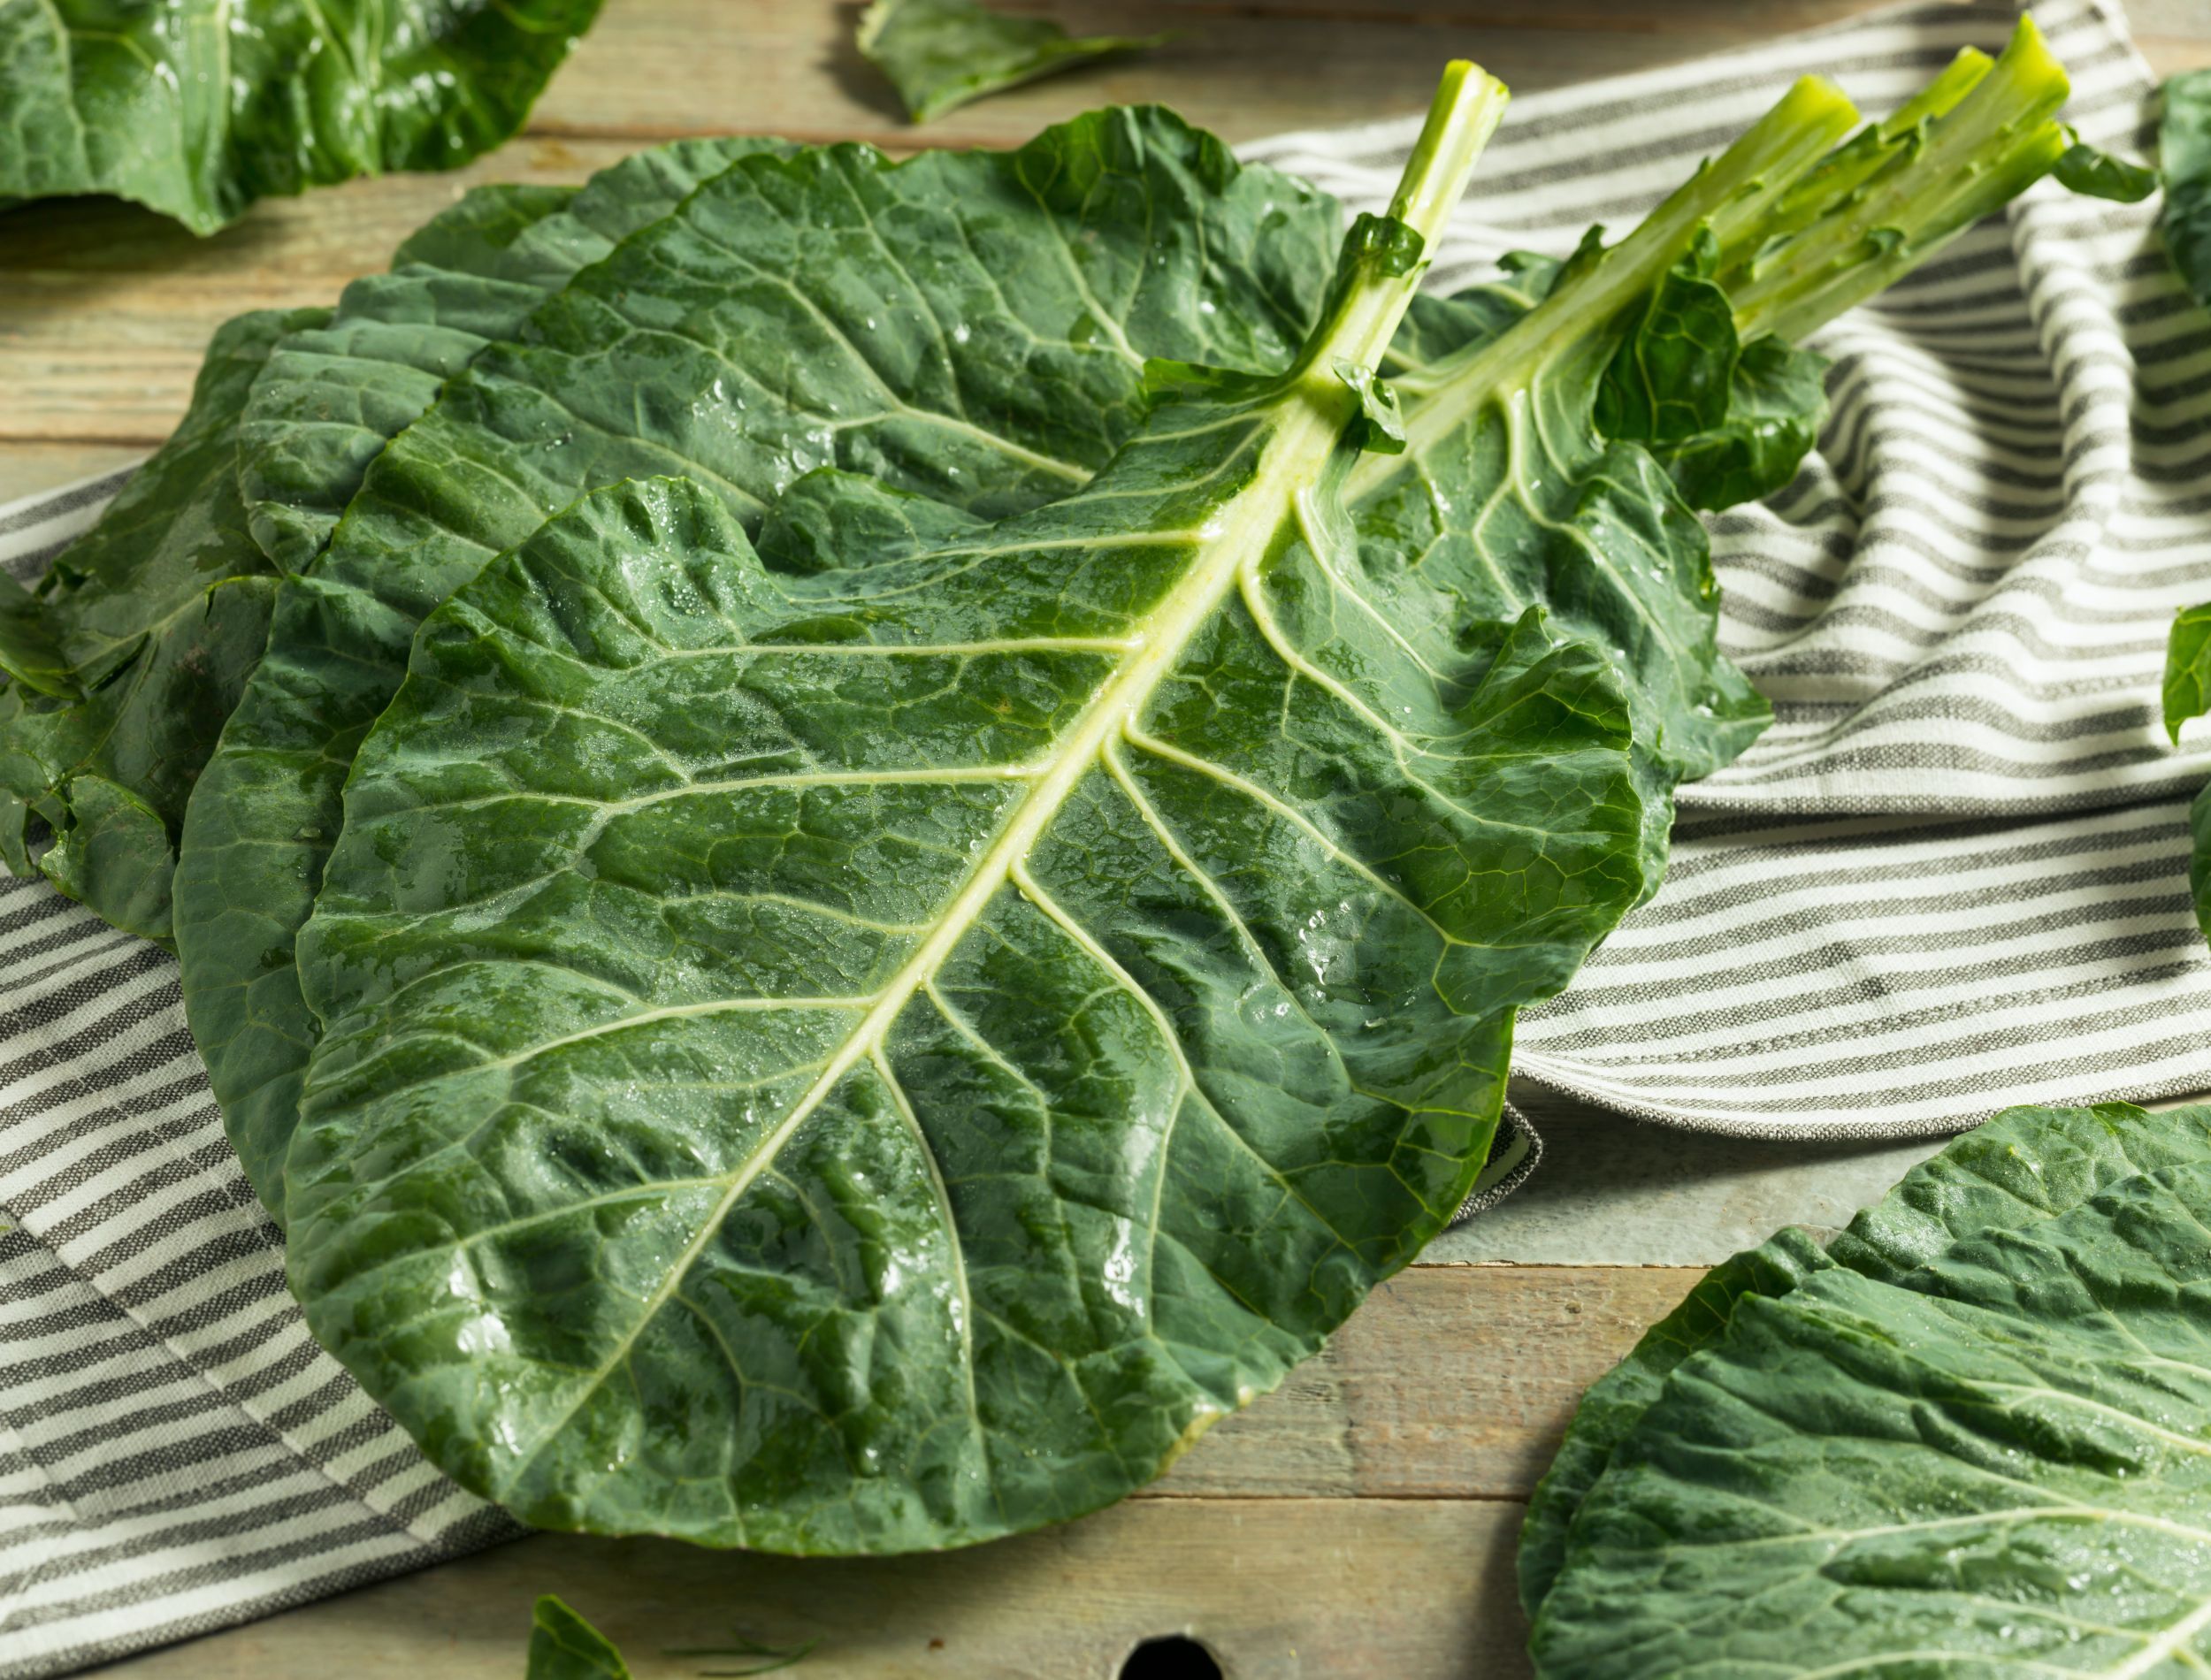 Freshly harvested collard greens on a cutting board in the kitchen